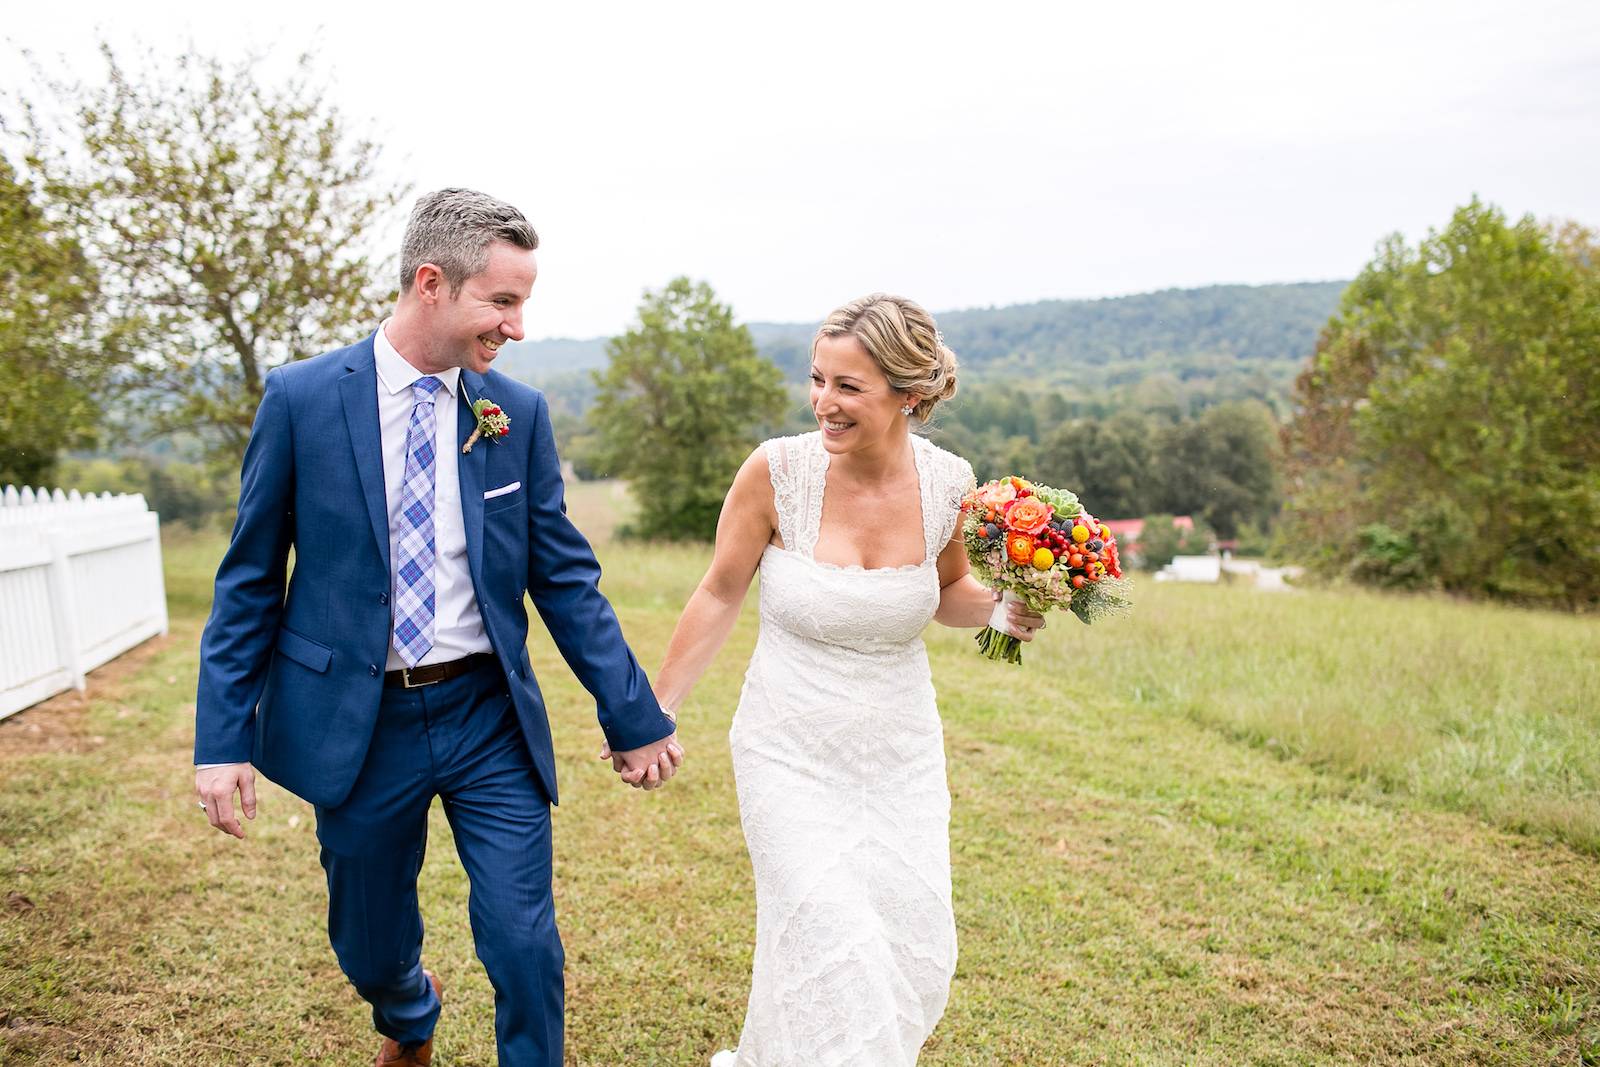 Rustic Elopement at Front Porch Farms from Erin Allender |  Nashville